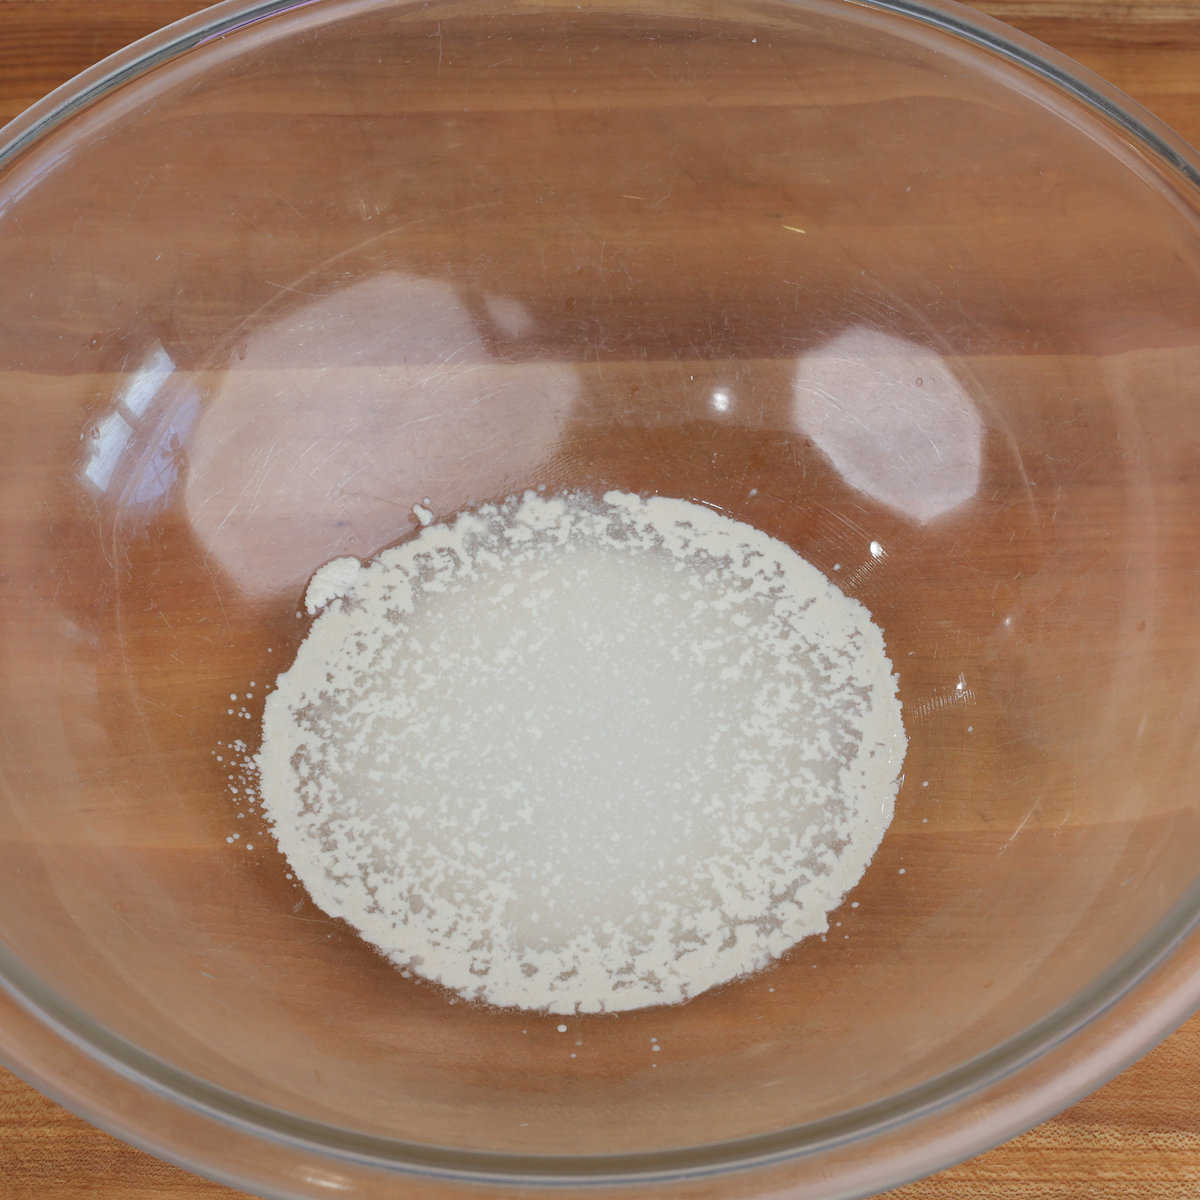 yeast dissolving in water in a large bowl